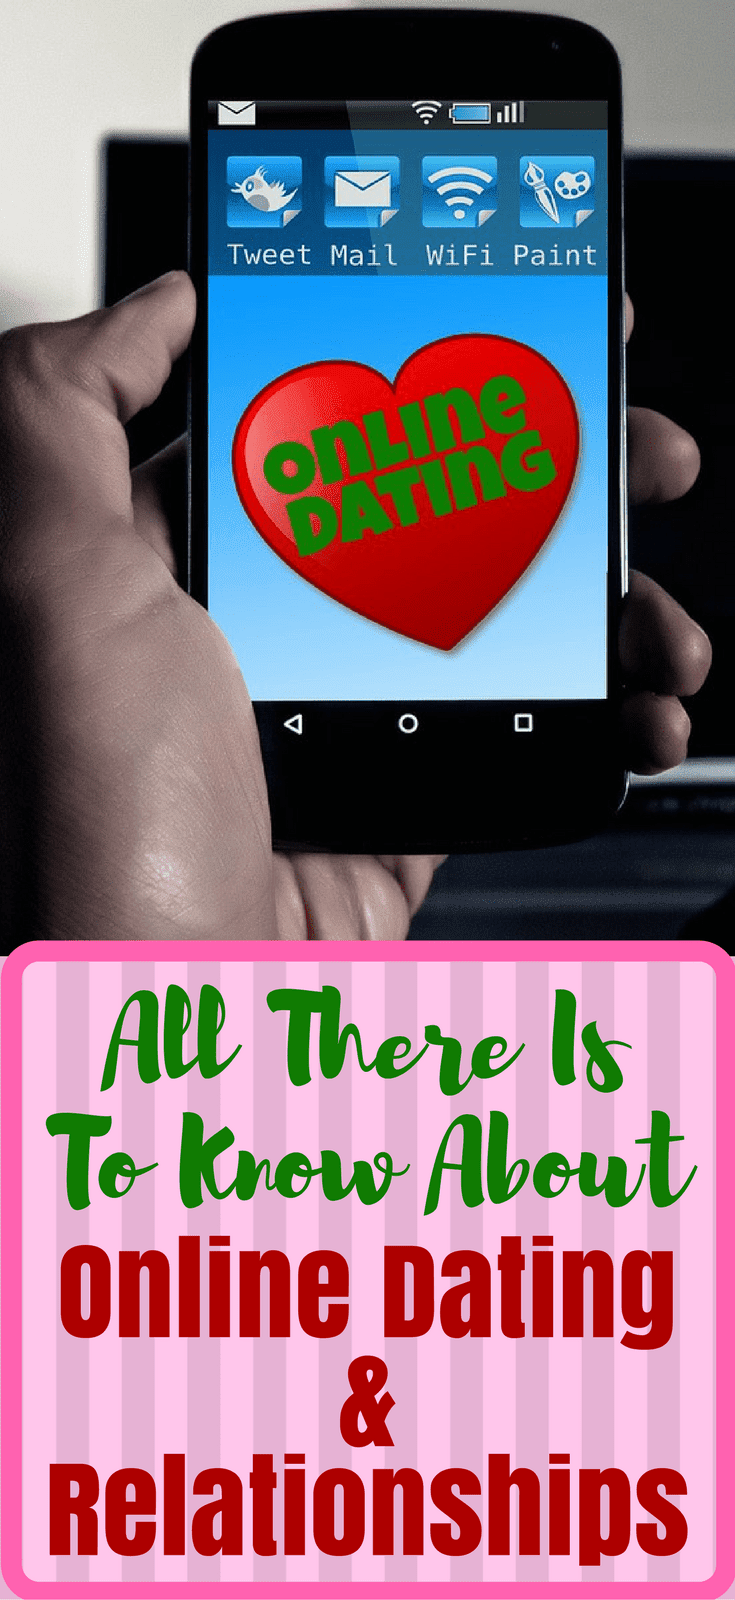 All There Is To Know About Online Dating